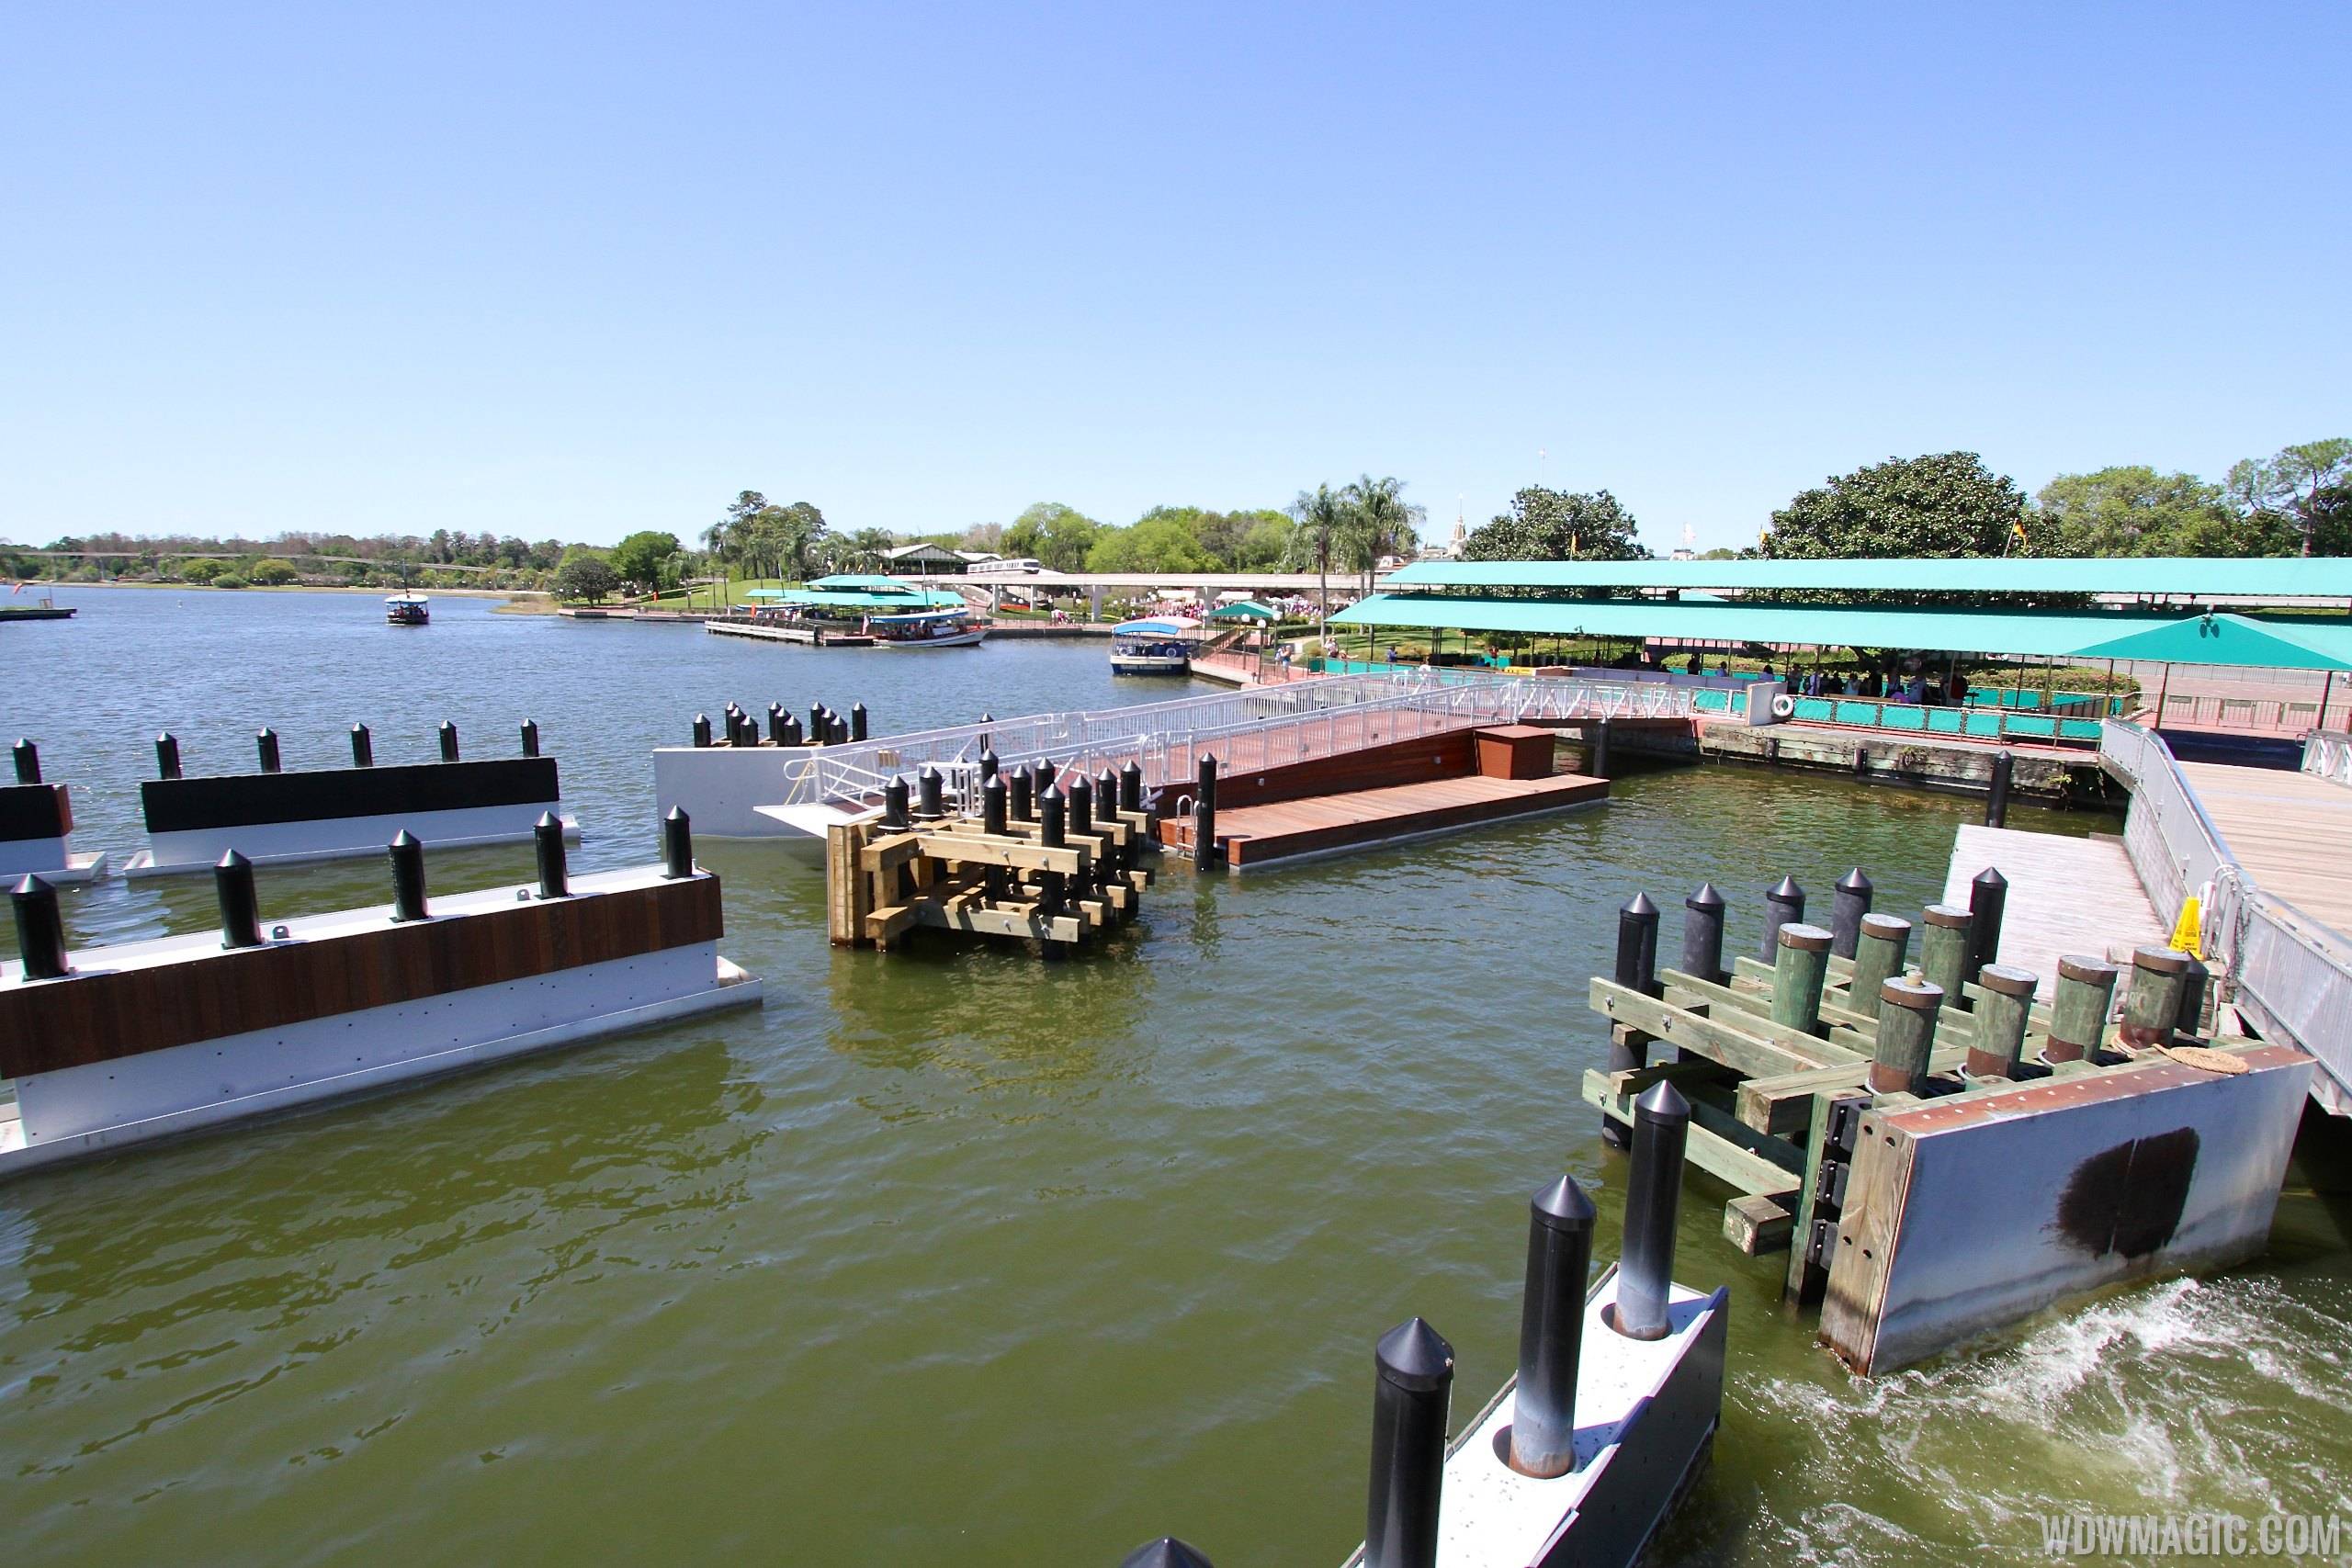 PHOTOS - New ferry boat docks at the TTC and Magic Kingdom now complete